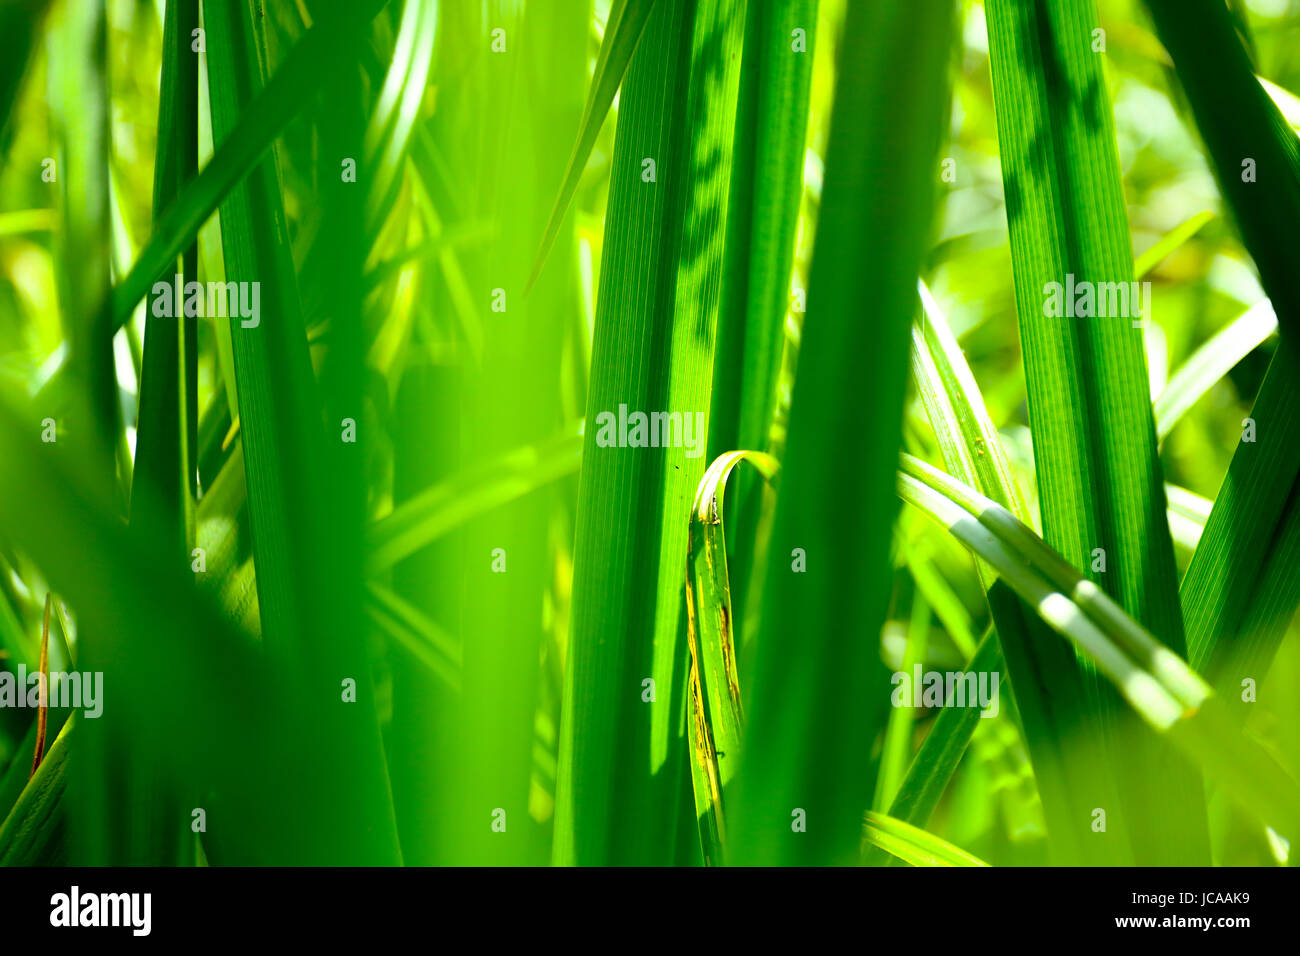 Plants: Swamps reed Stock Photo